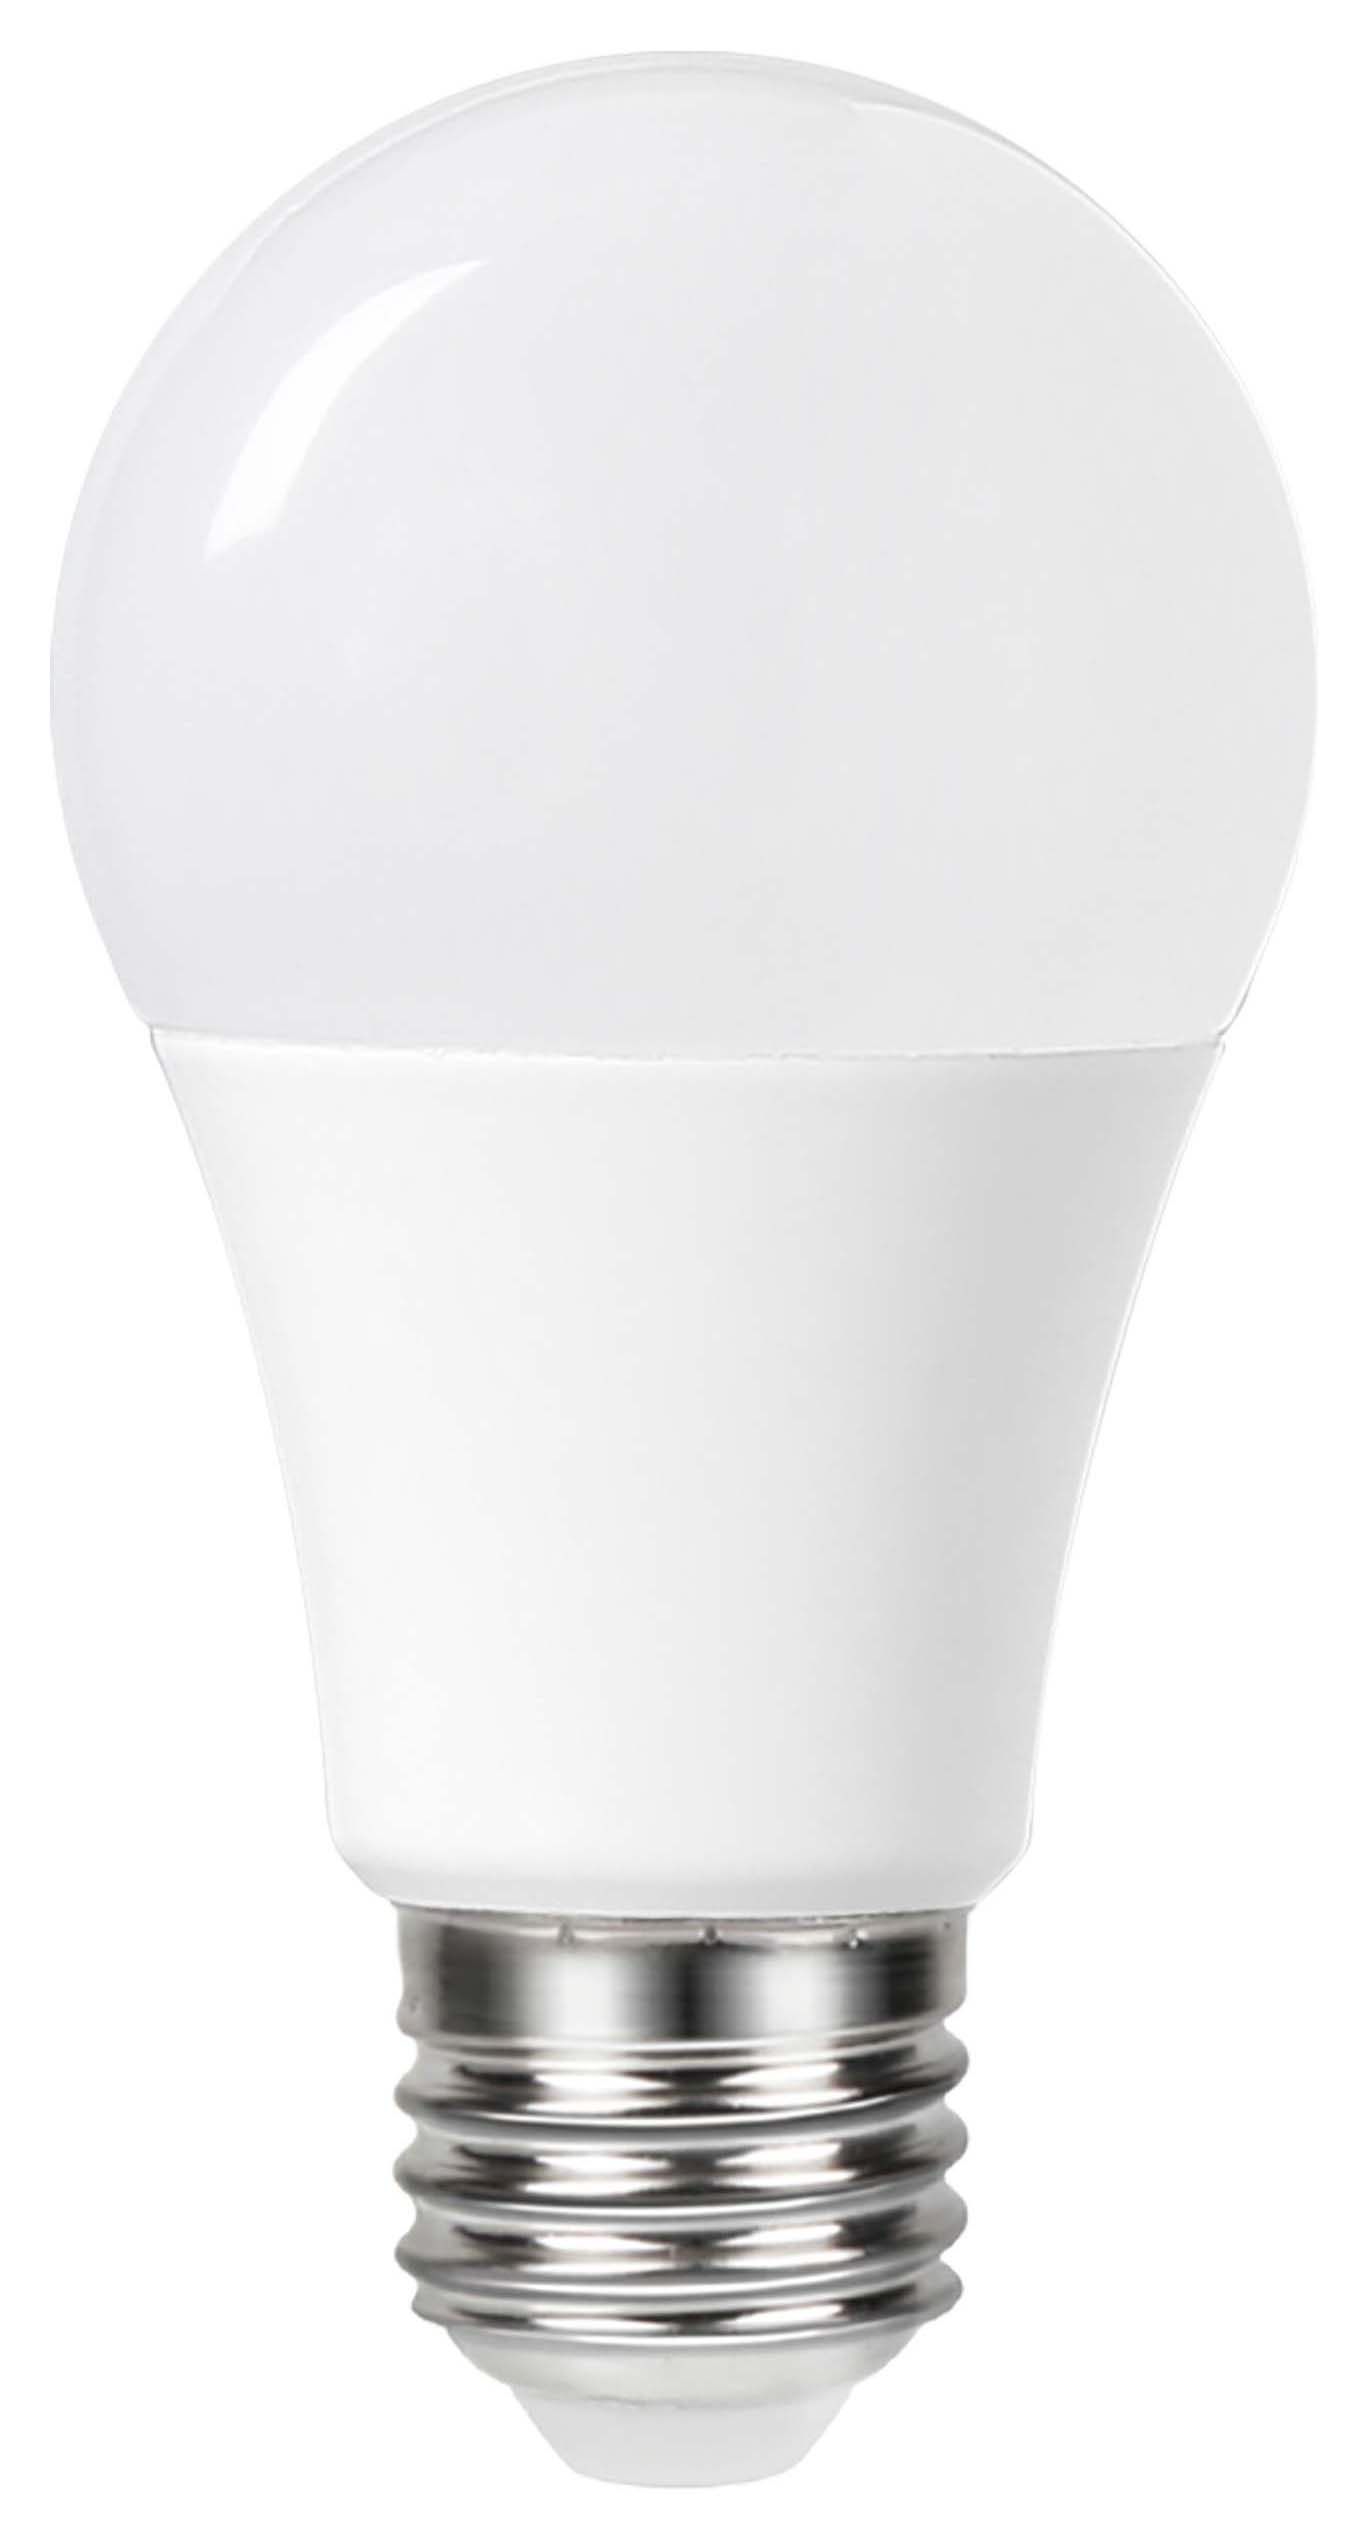 Wickes Dimmable GLS LED E27 14W Warm White Light Bulb